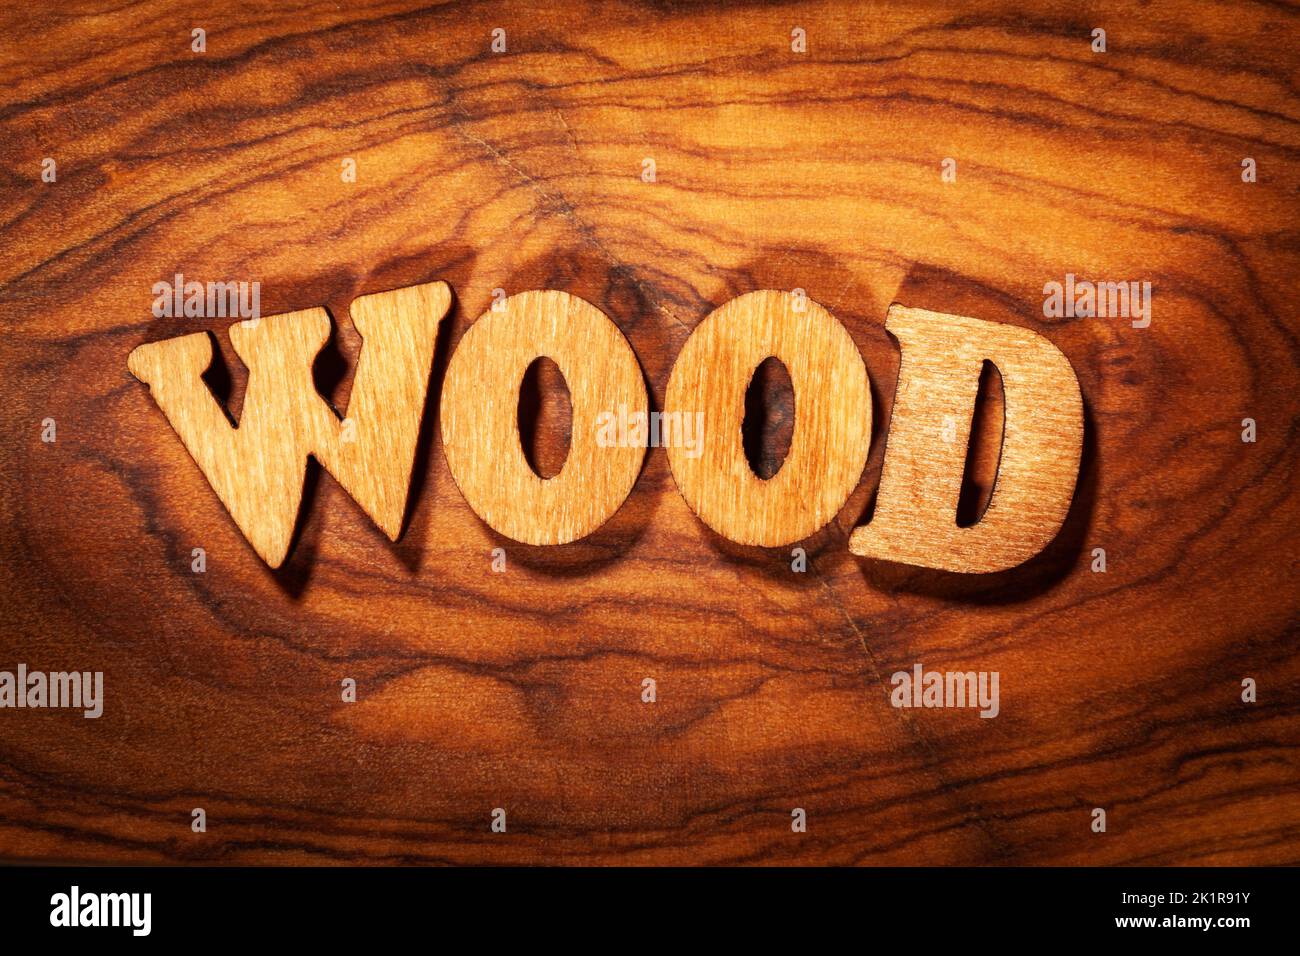 'Wood' word - Inscription by wooden letters close up Stock Photo